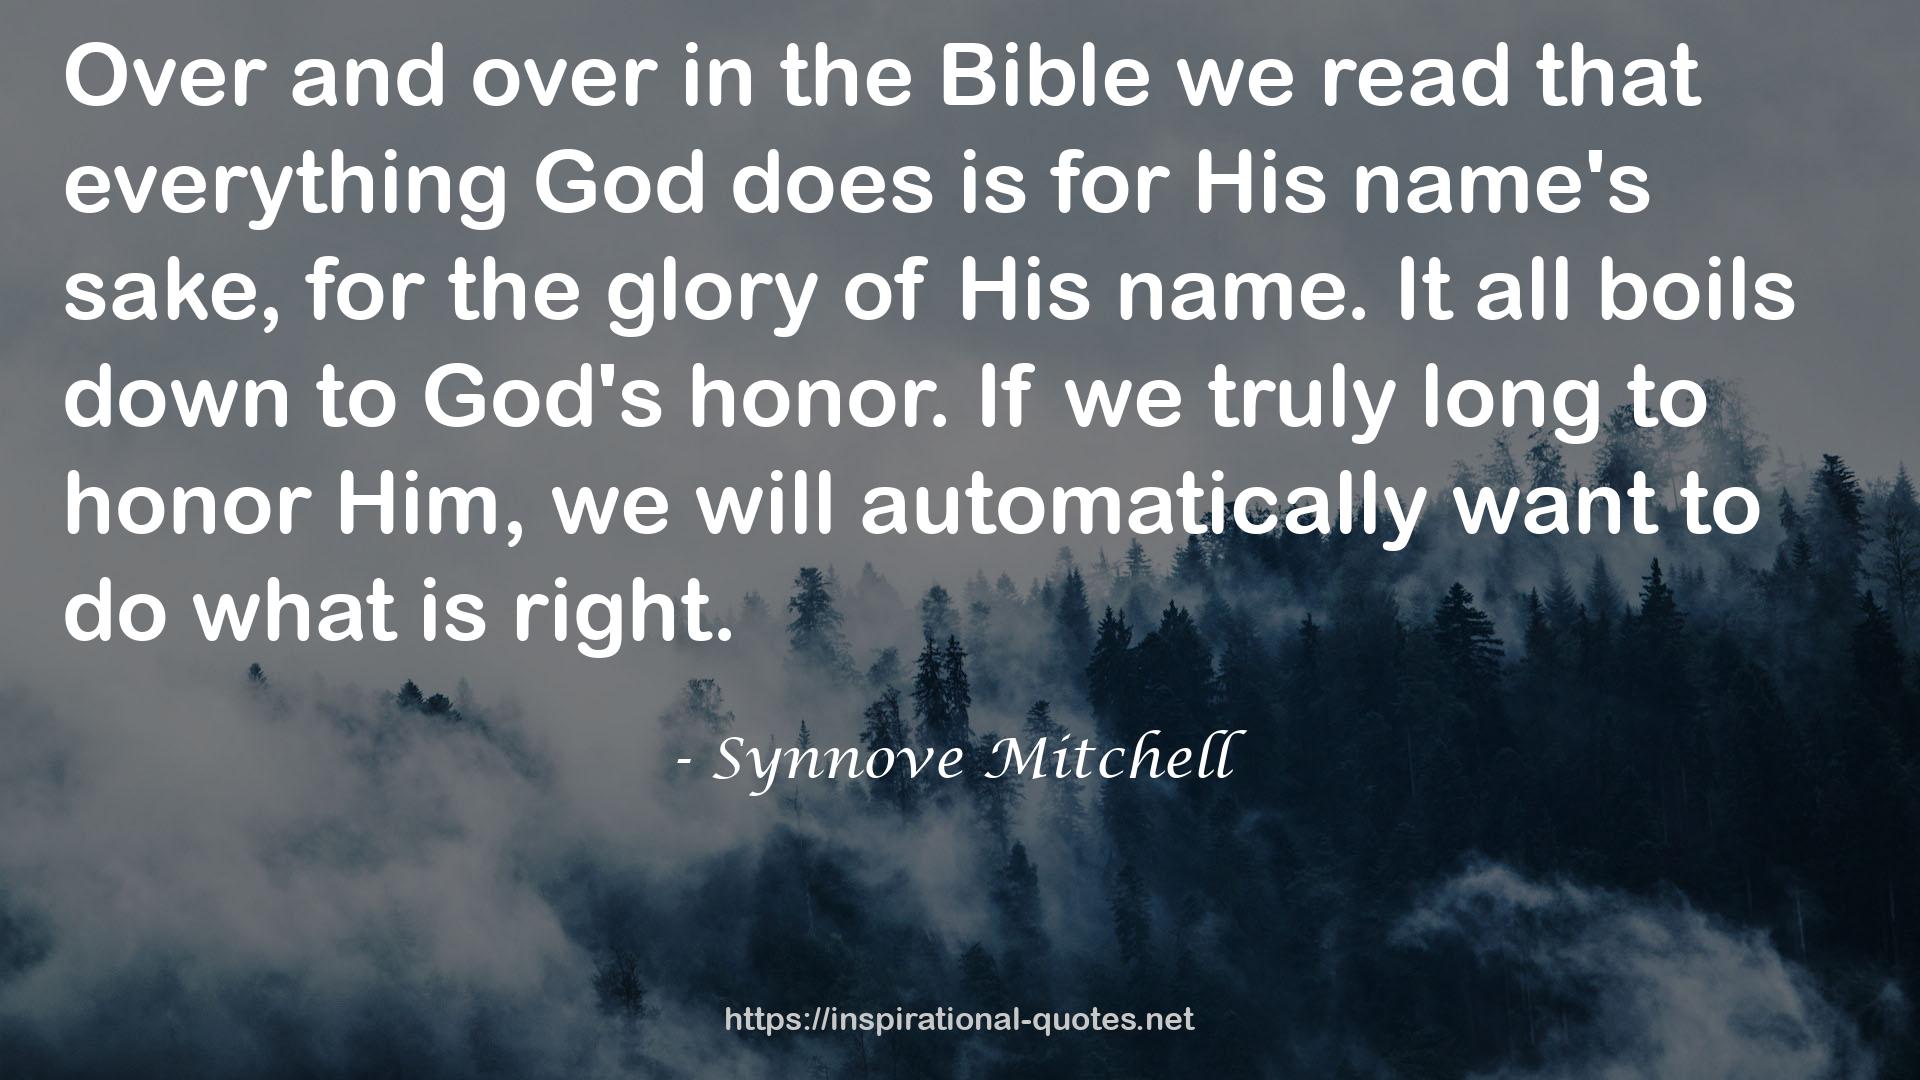 Synnove Mitchell QUOTES